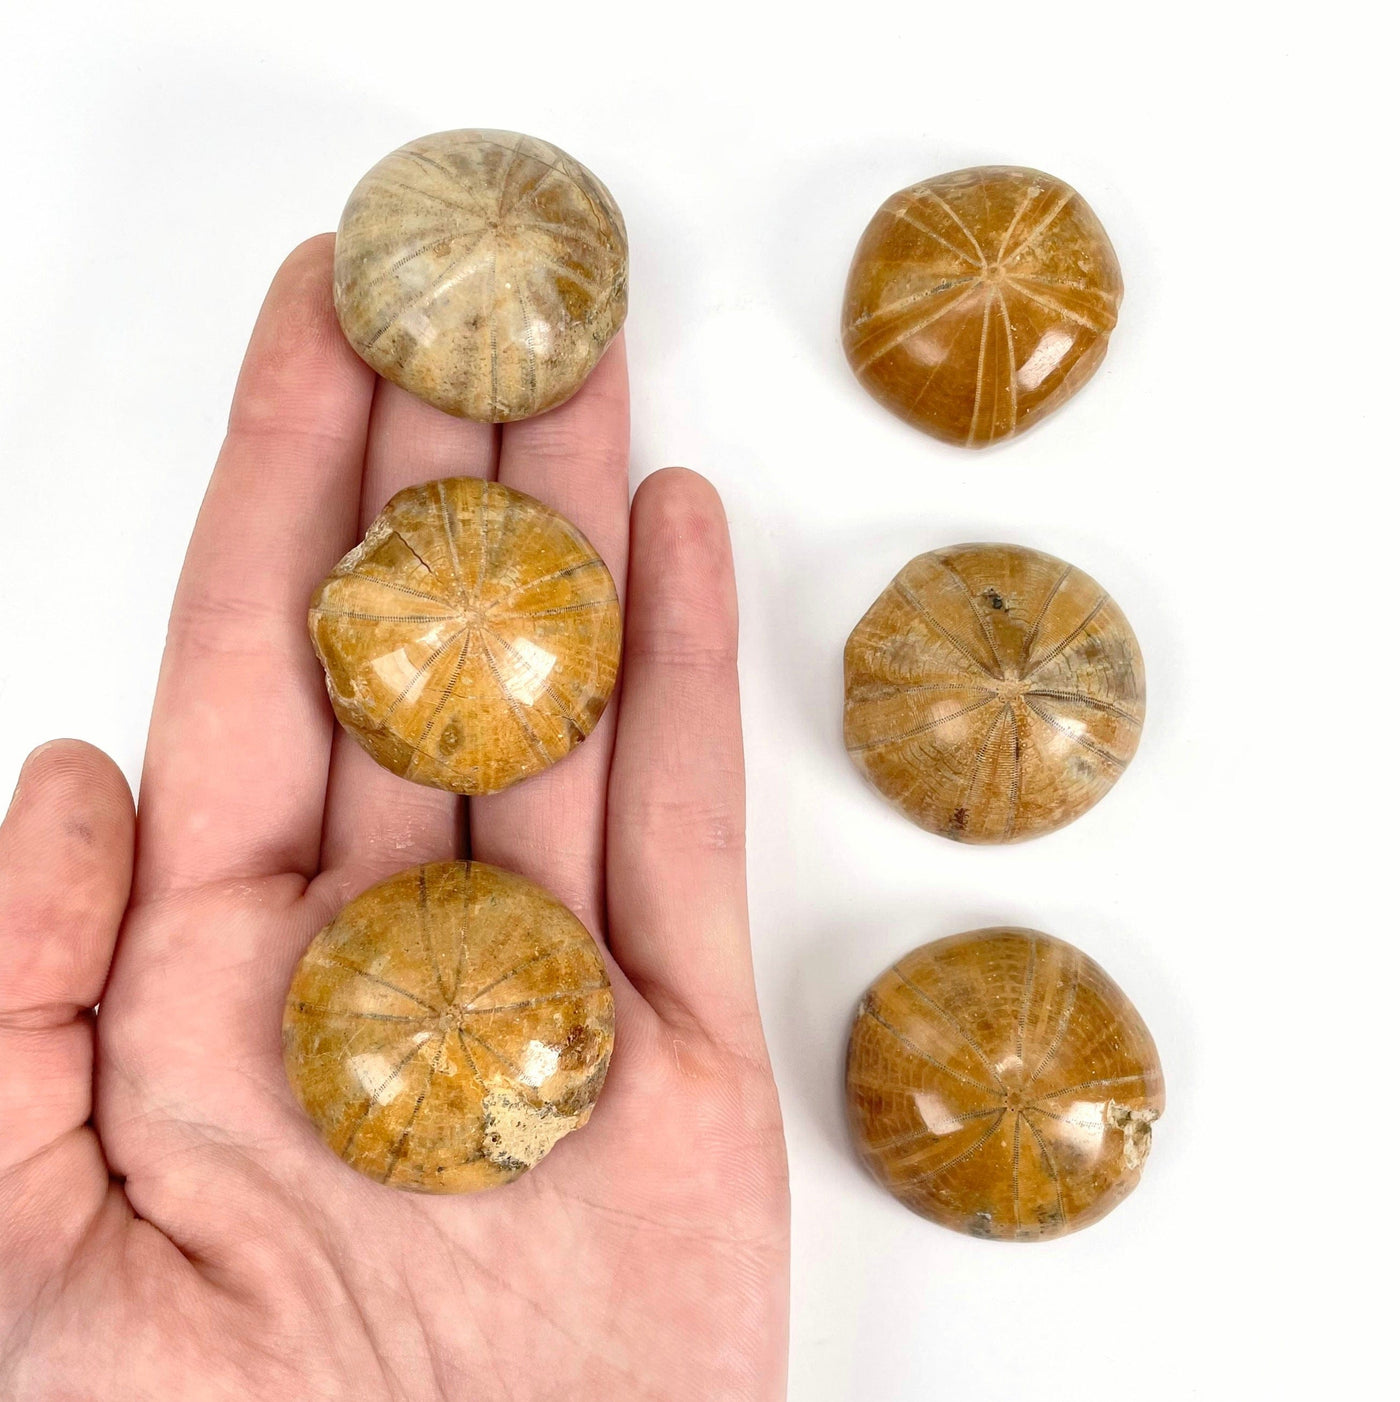 three fossilized polished sand dollars in hand with three others on white background